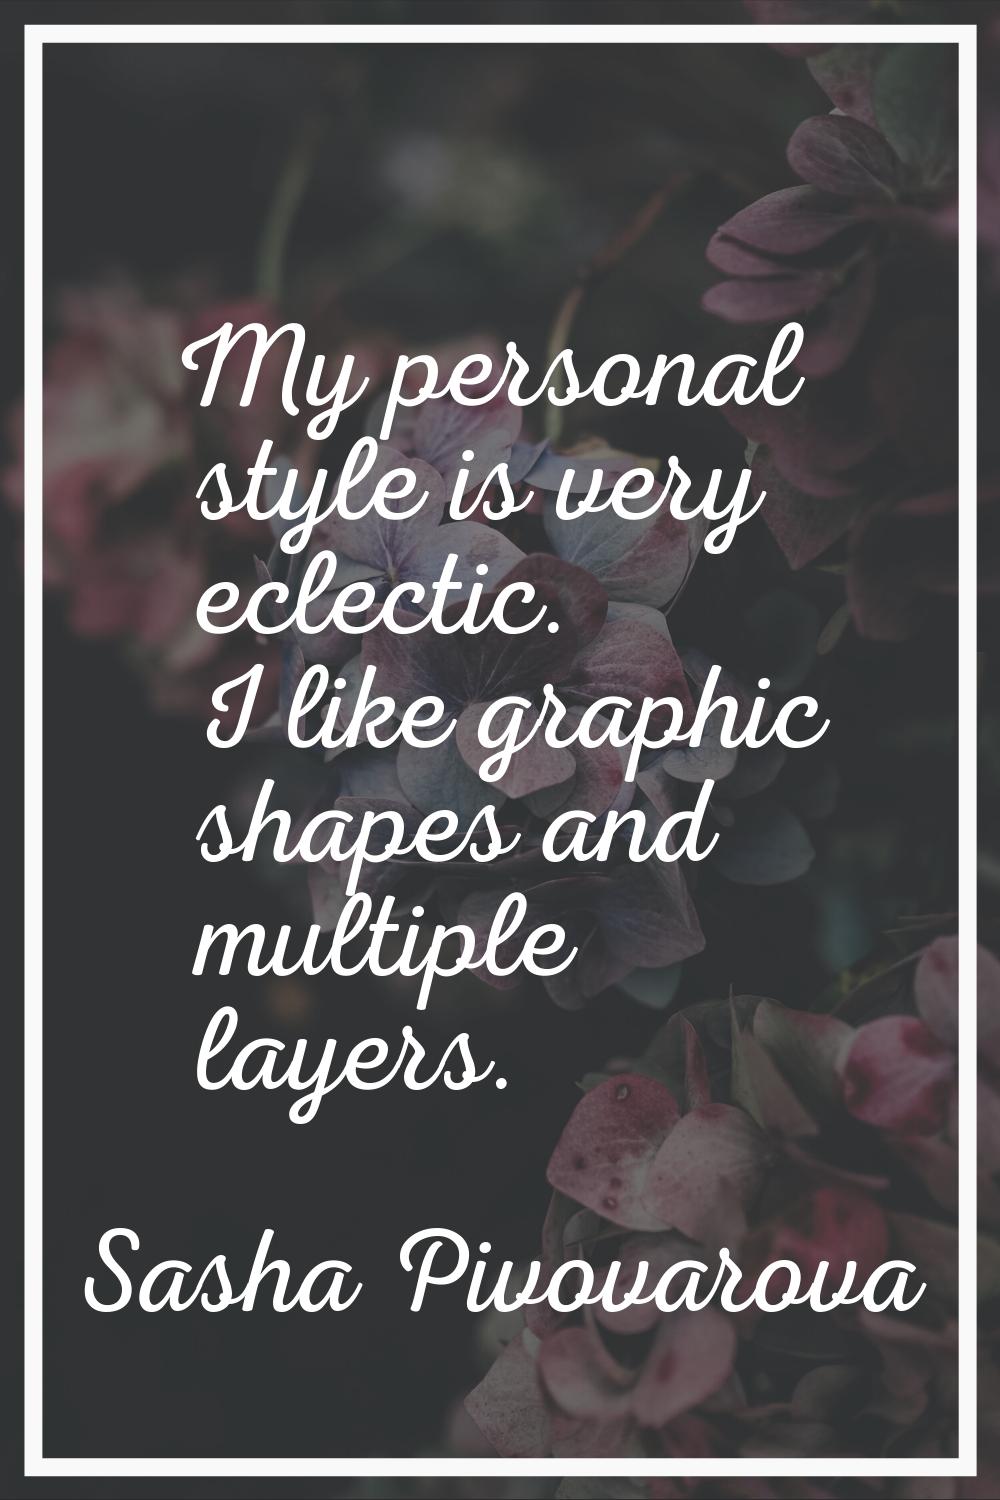 My personal style is very eclectic. I like graphic shapes and multiple layers.